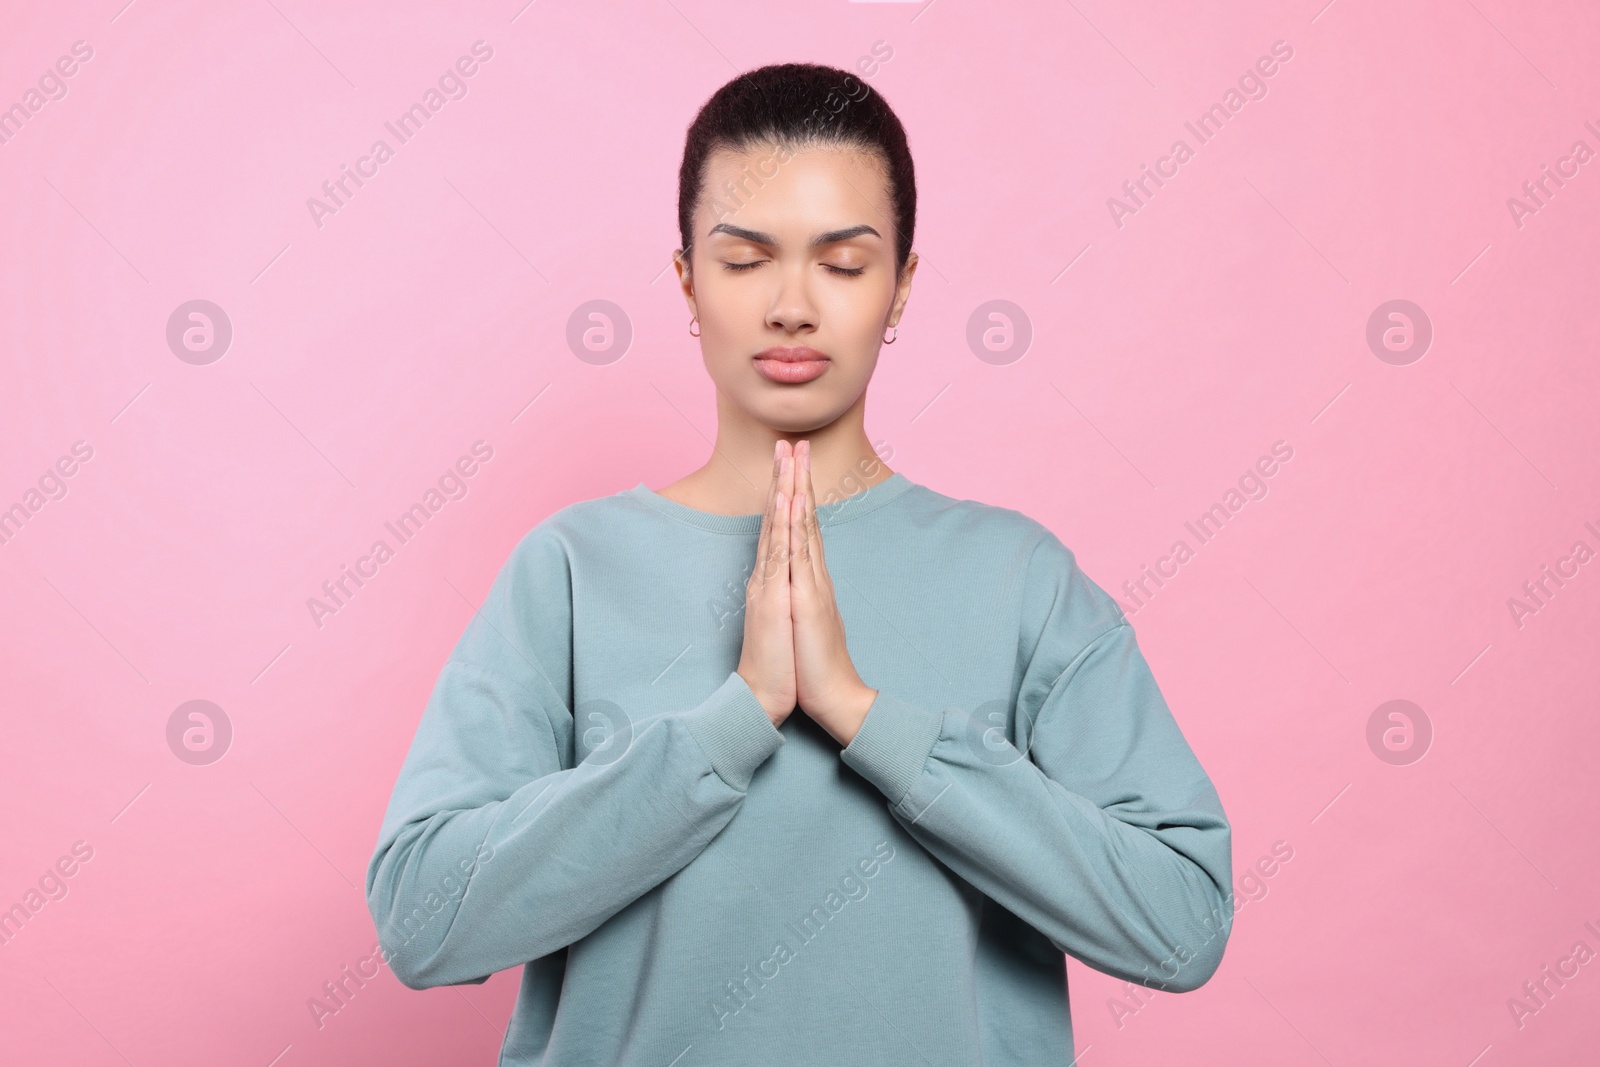 Photo of African American woman with clasped hands praying to God on pink background